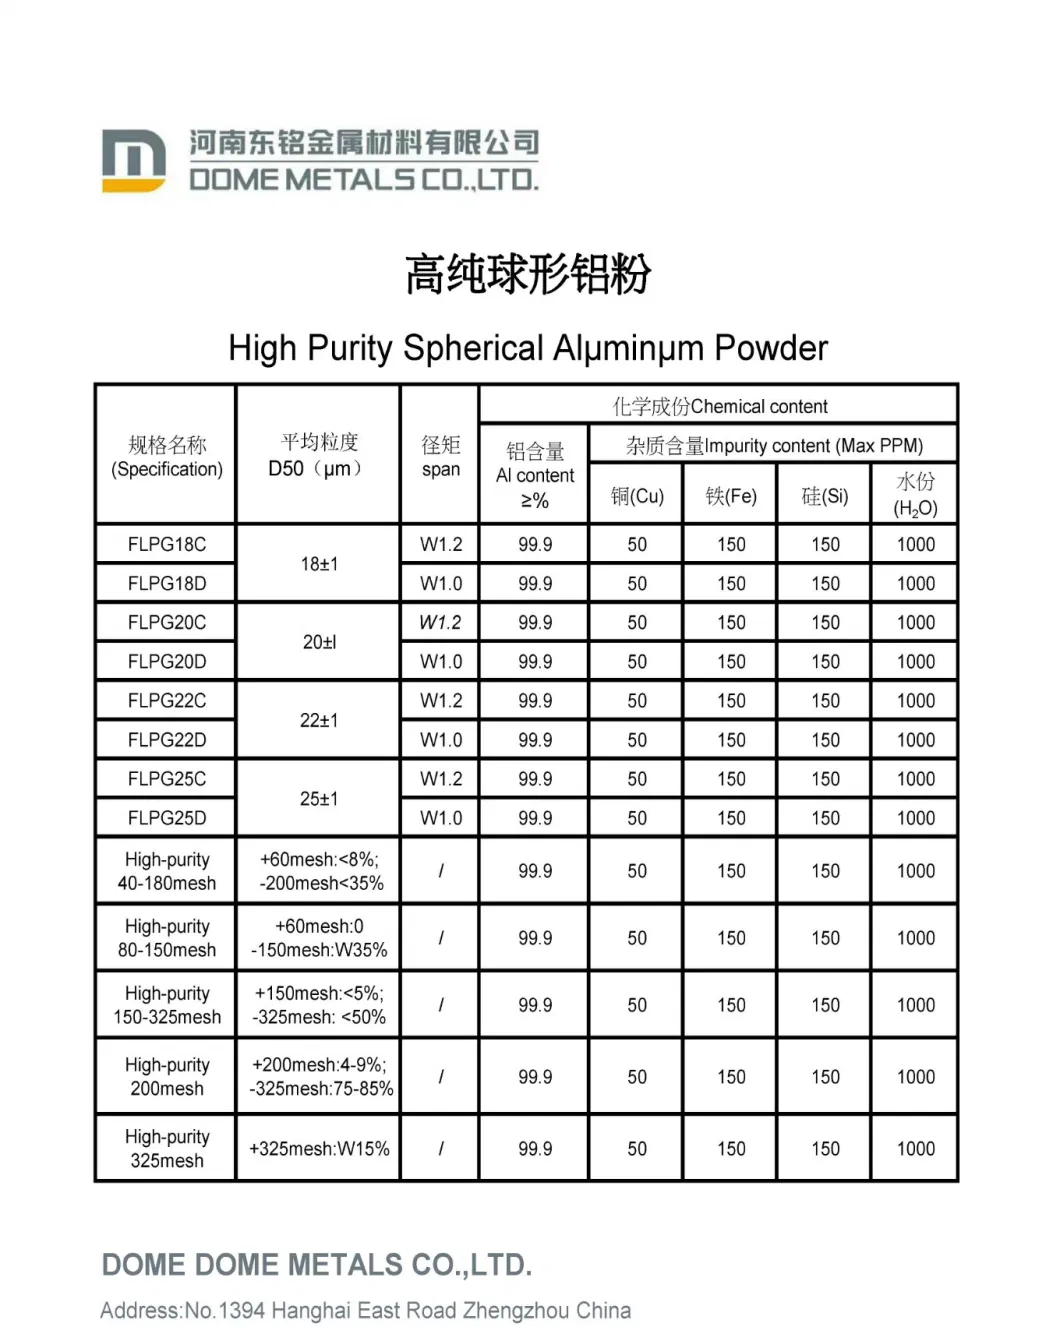 European Market Spherical Aluminum Powder Used for Widely Usage